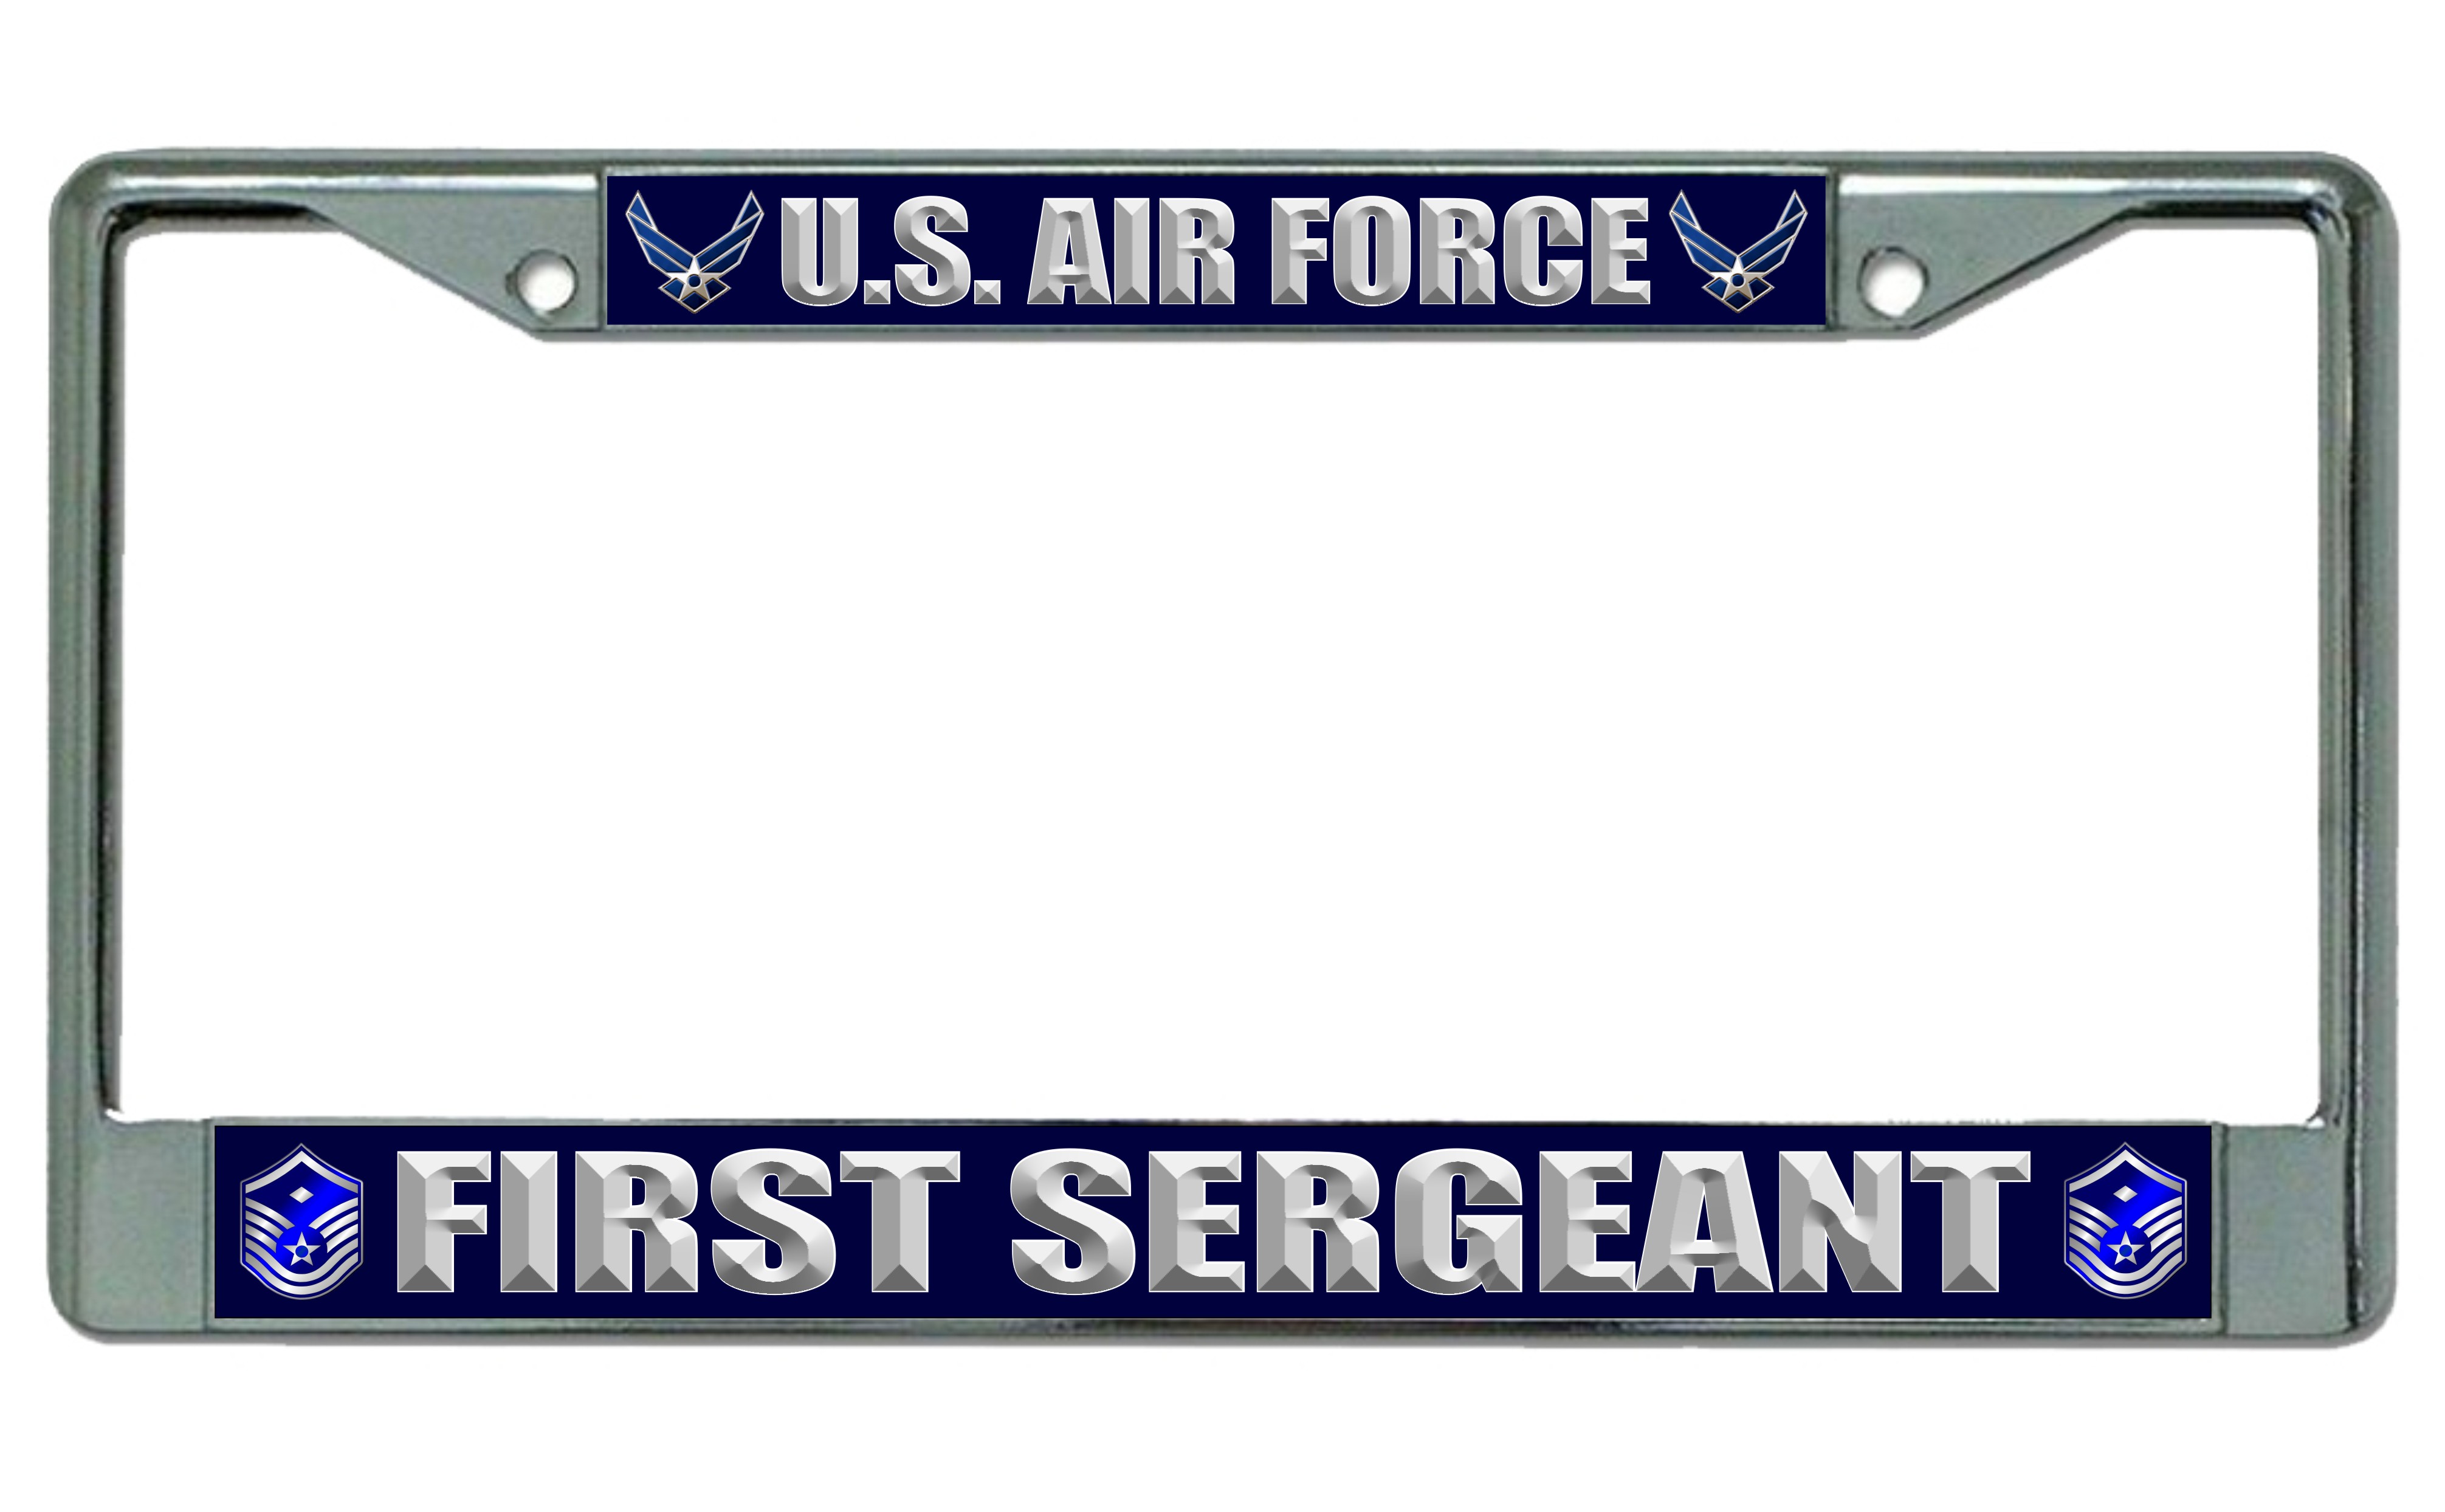 U.S. Air Force First Sergeant Photo License Frame.  Free SCREW Caps Included